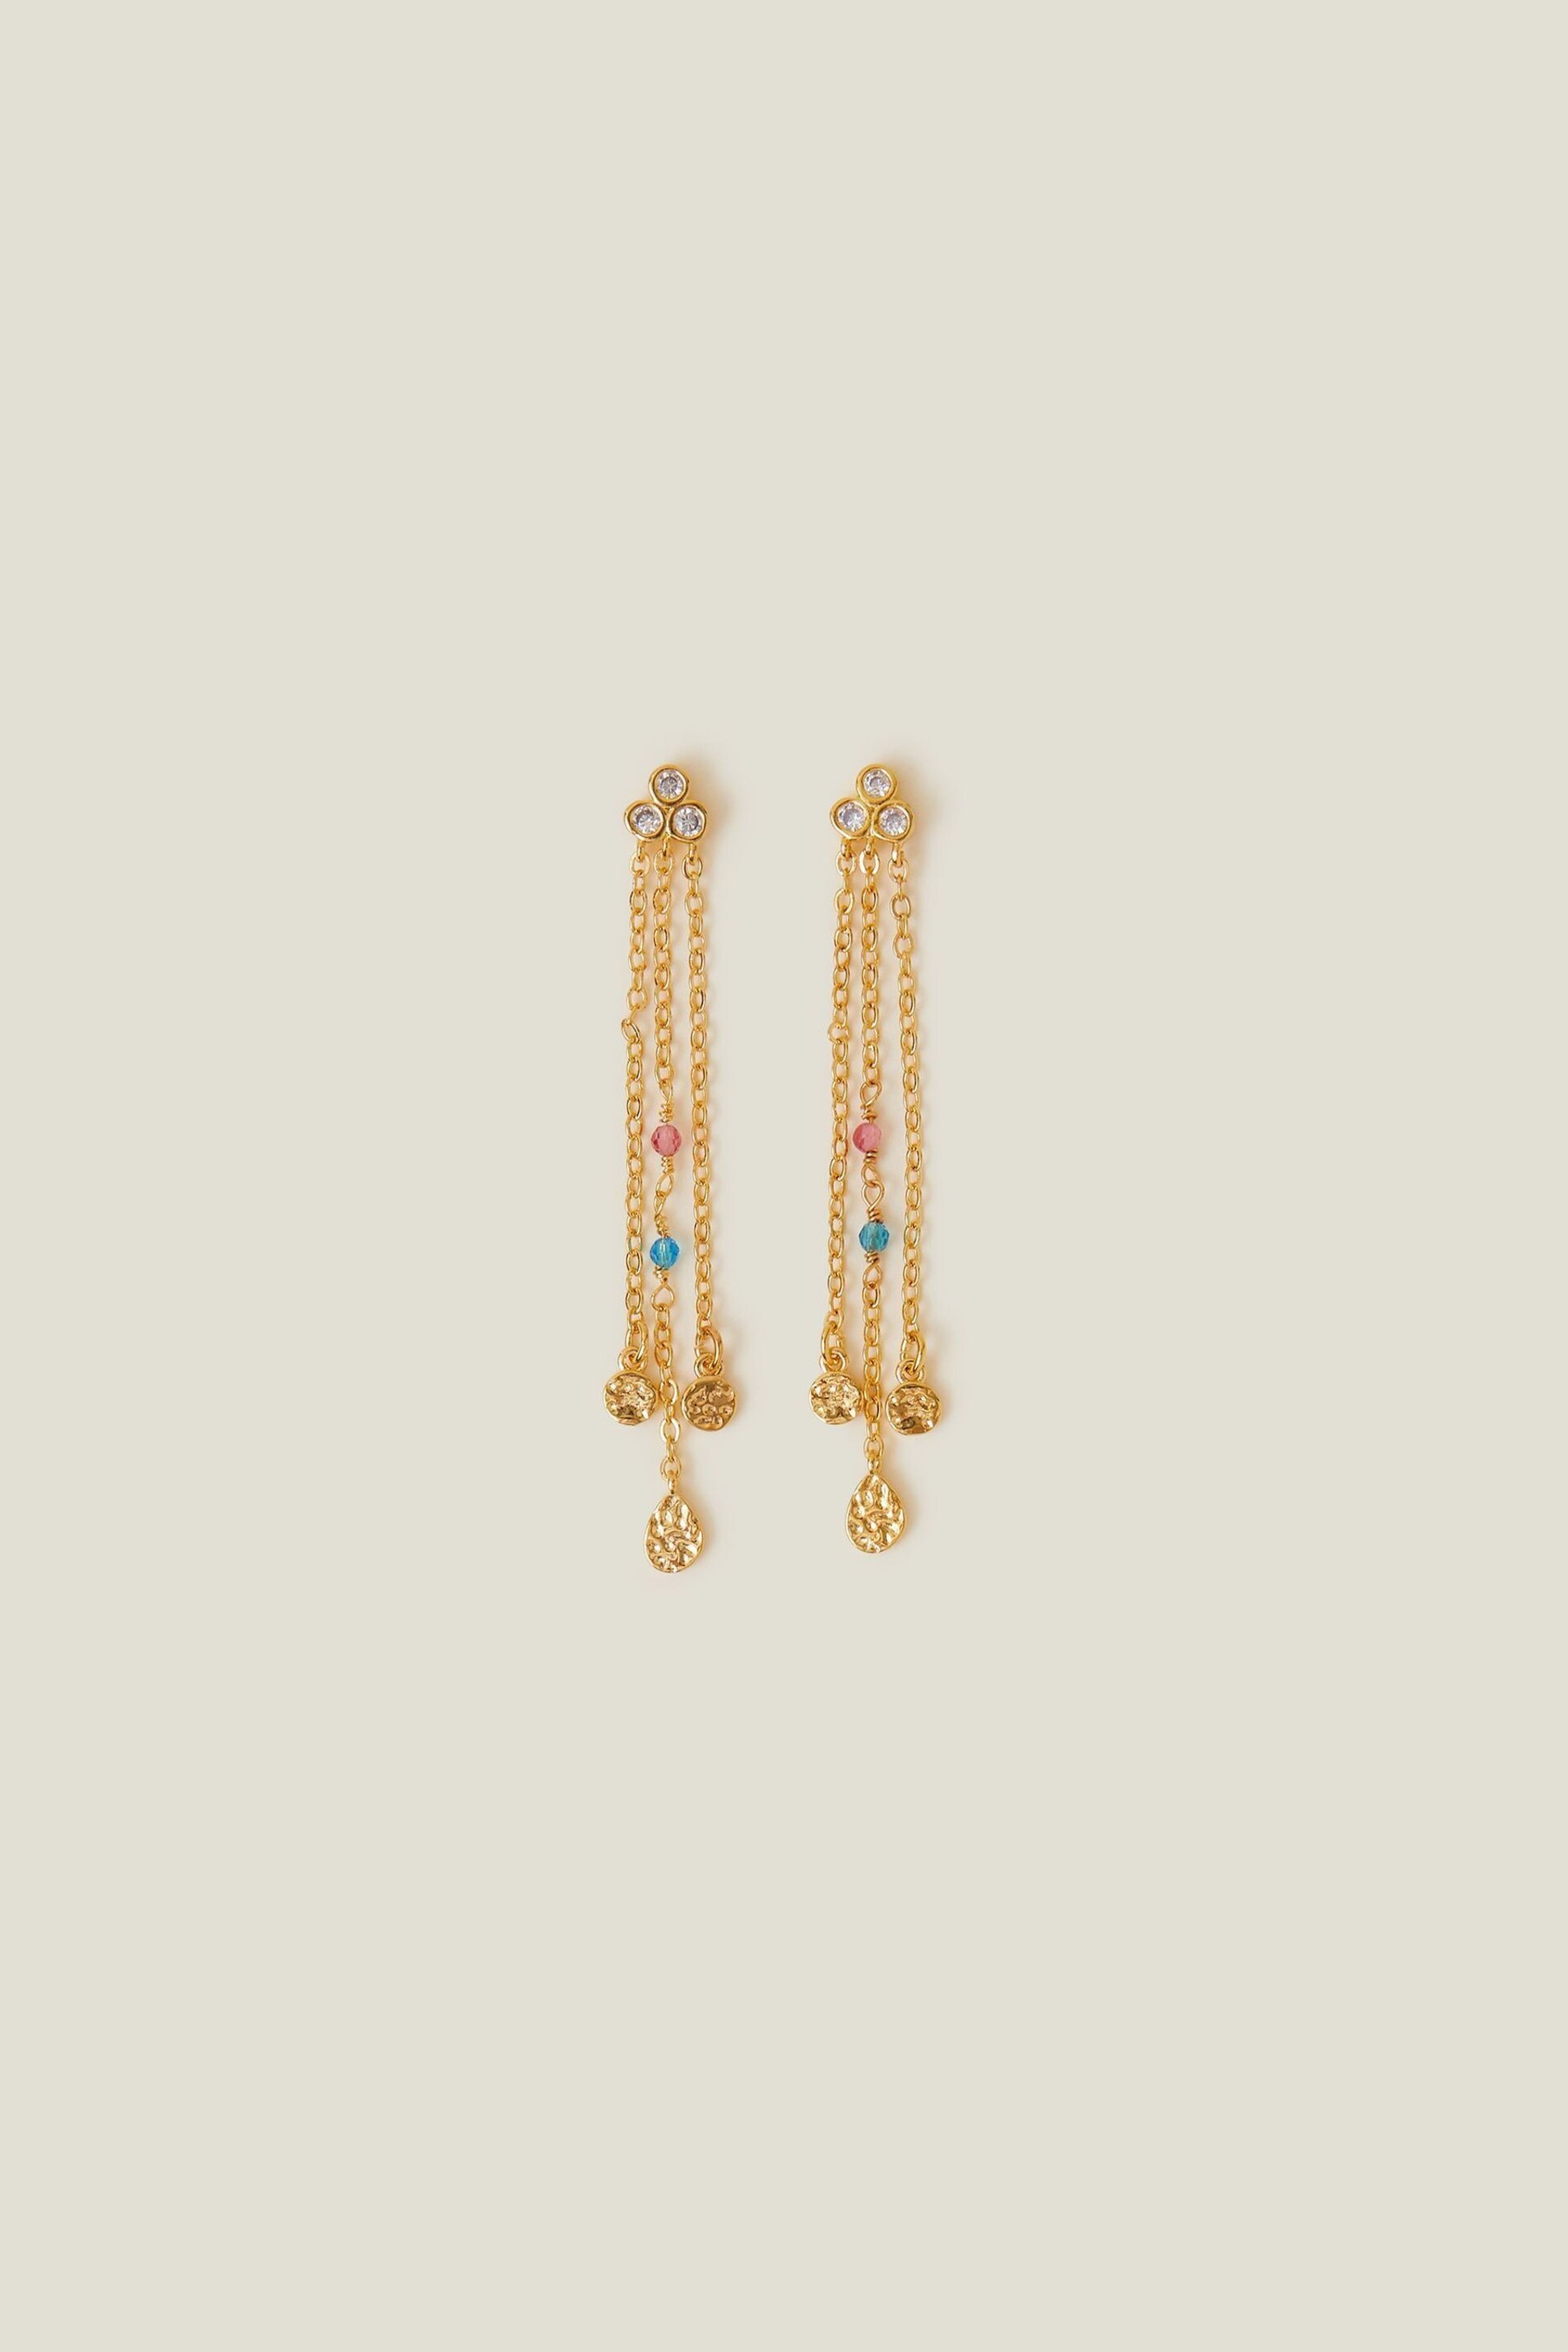 Accessorize 14ct Gold Plated Tone Beaded Long Drop Earrings - Image 1 of 3